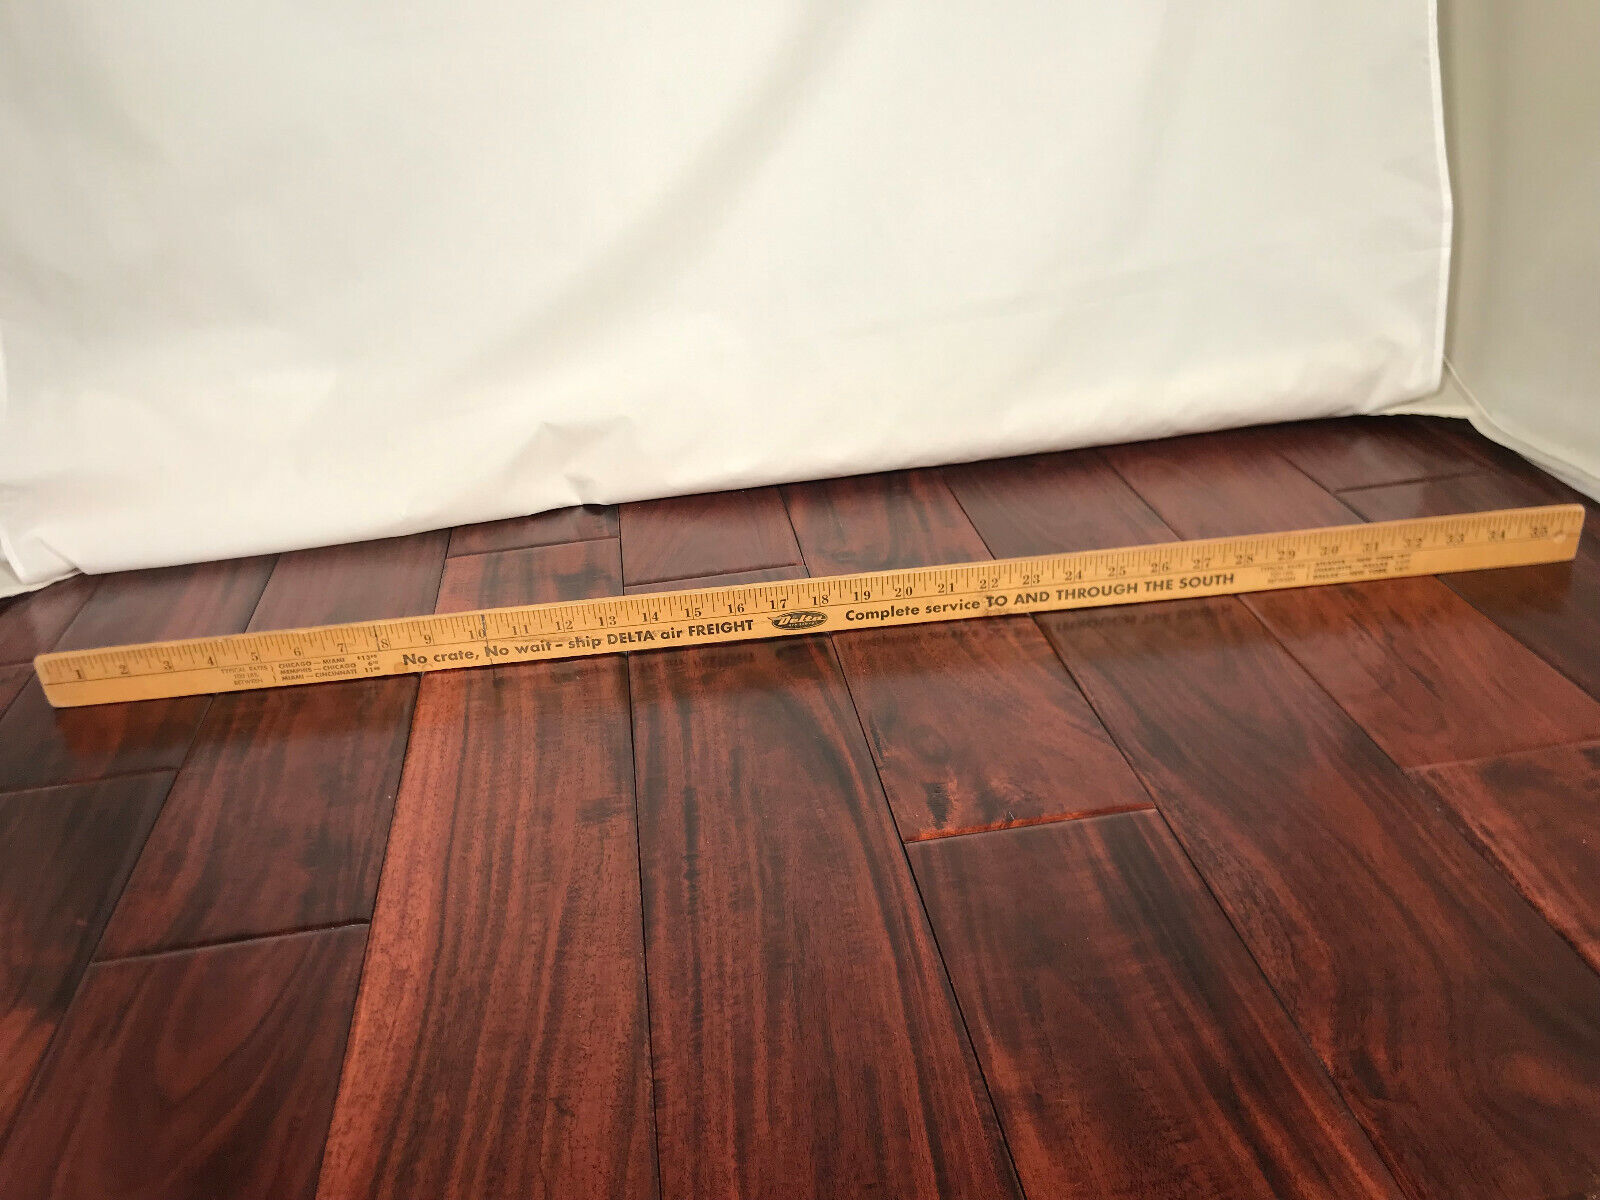 Vintage Delta Air Lines Air Freight Advertising Yard Stick